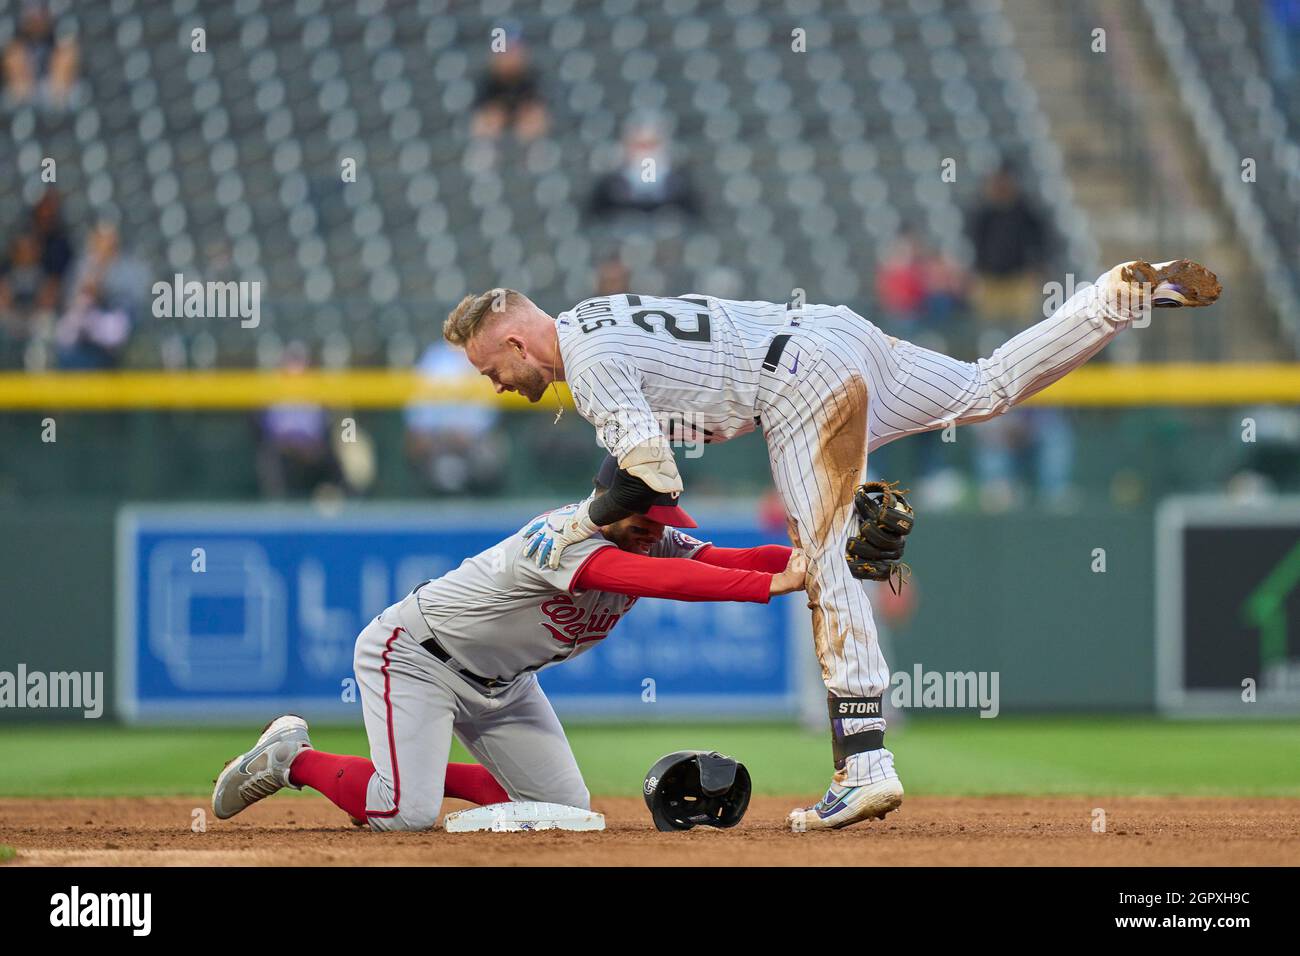 Denver CO, USA. 29th Sep, 2021. Washington second basemen Luis Garcia (2) makes a play during the game with Washington Nationals and Colorado Rockies held at Coors Field in Denver Co. David Seelig/Cal Sport Medi. Credit: csm/Alamy Live News Stock Photo